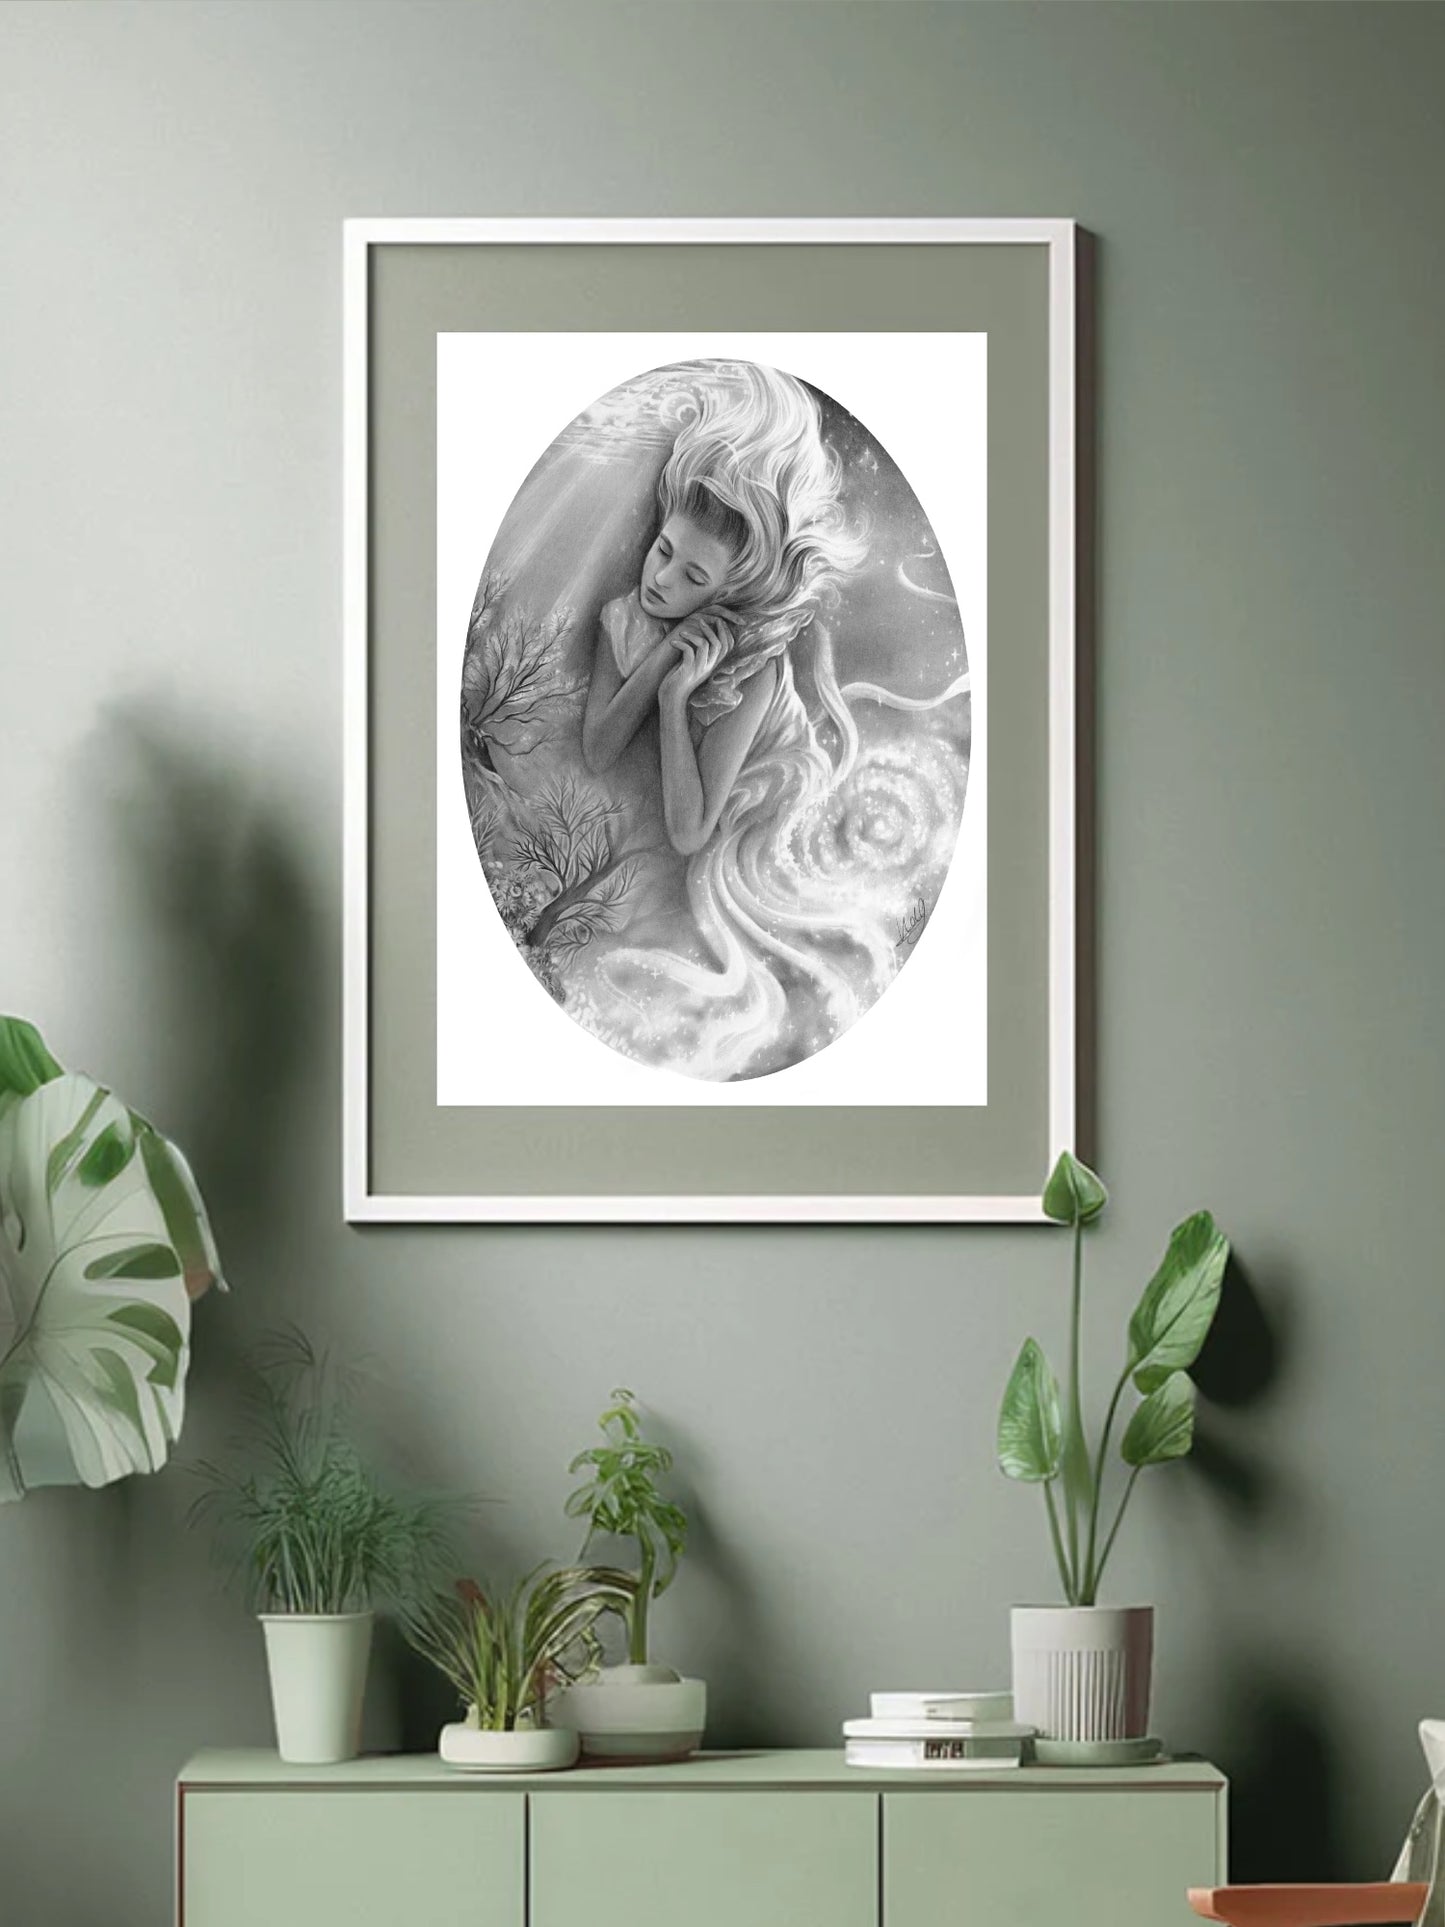 Enchanting women immersed with the ocean, trees, and universe - graphite art drawing